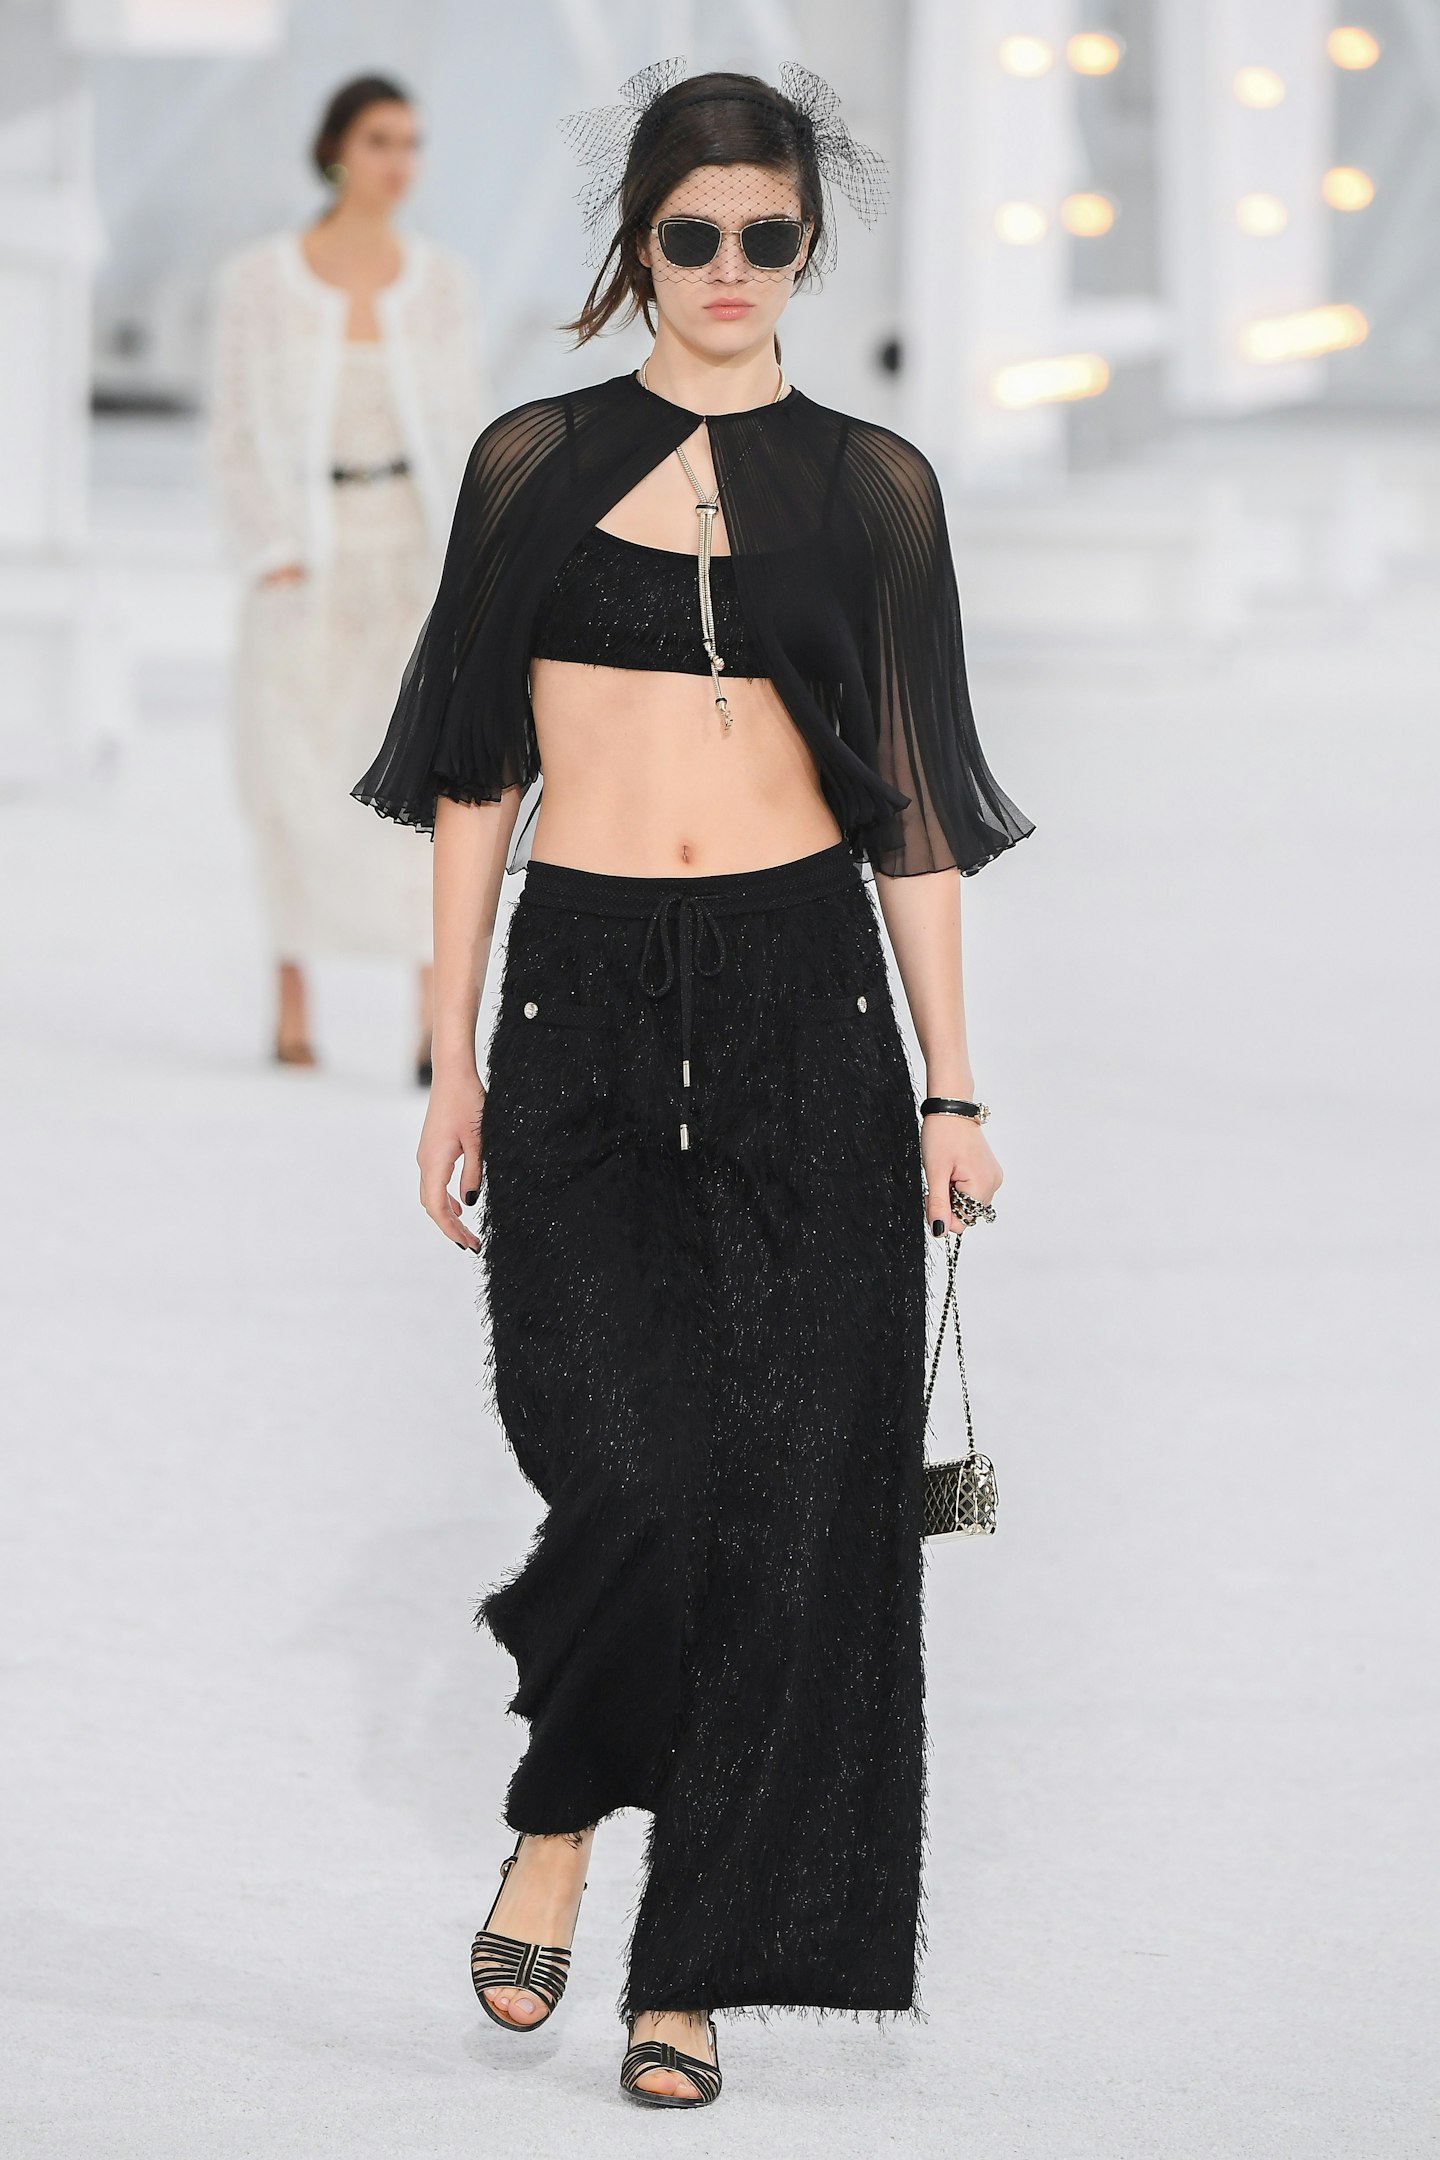 A model wearing all-black at Chanel SS21